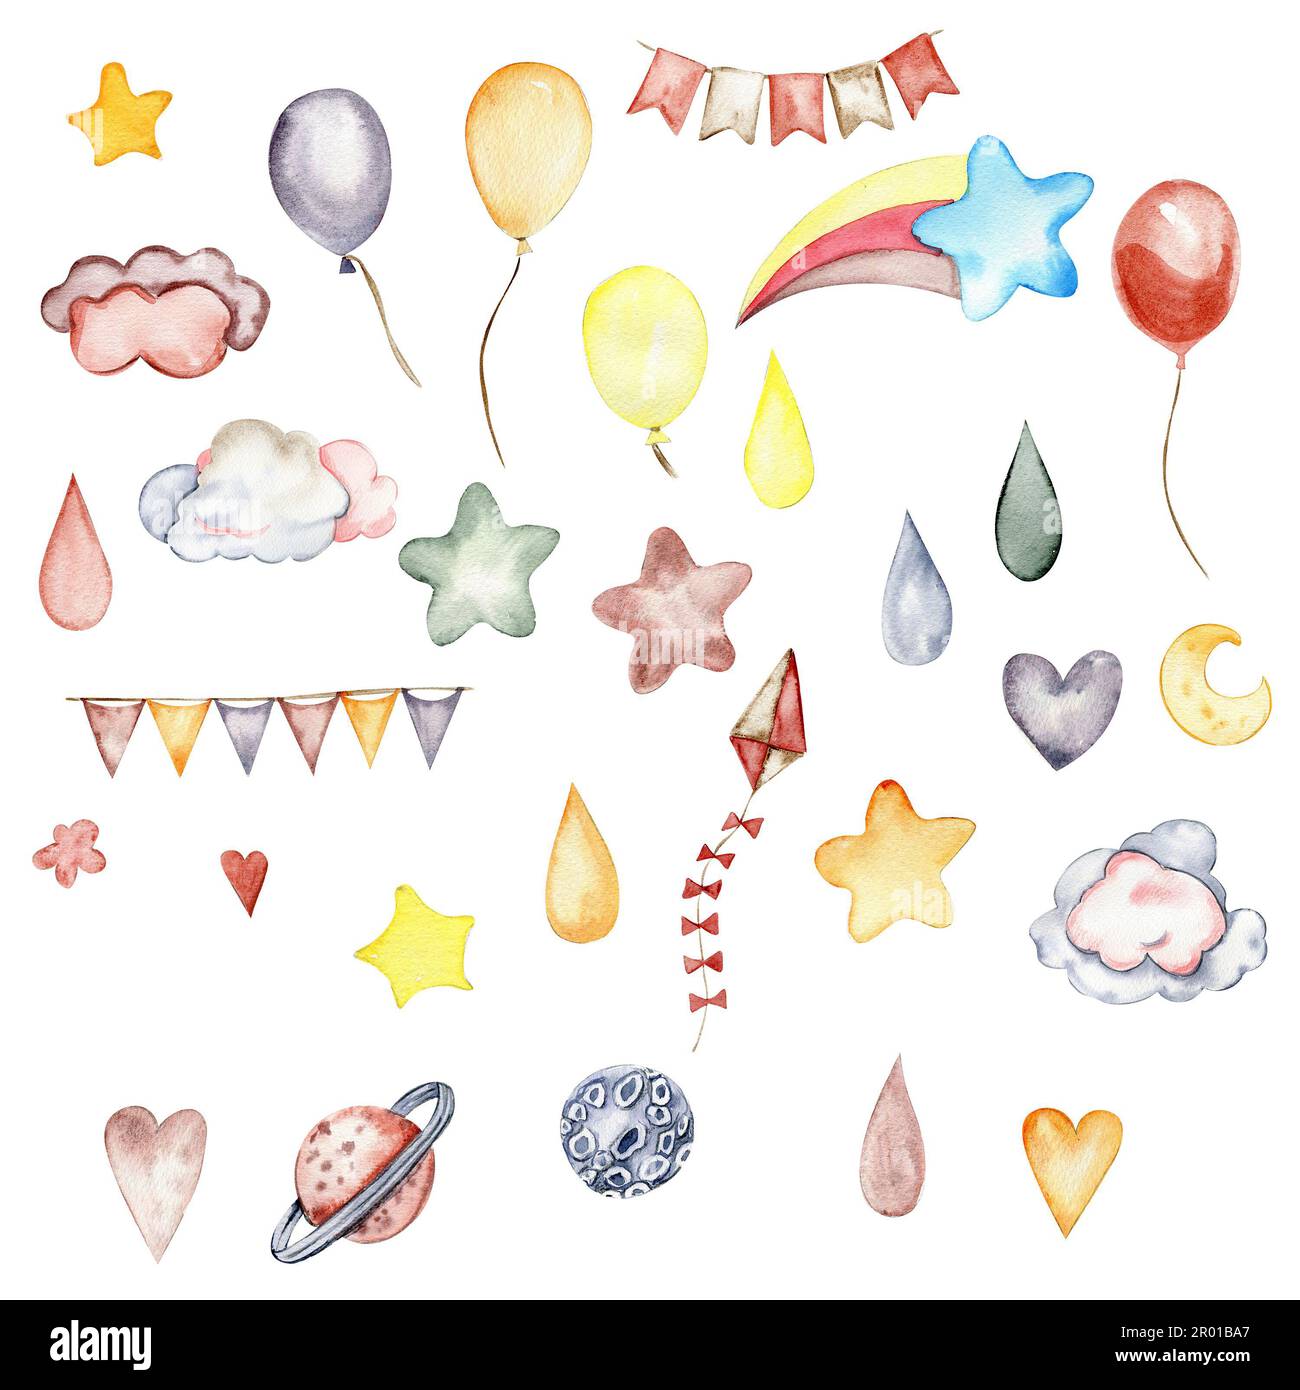 Watercolor hand painted cute party celebration elements. Illustration isolated on white background. Design for baby shower party, birthday, cake Stock Photo